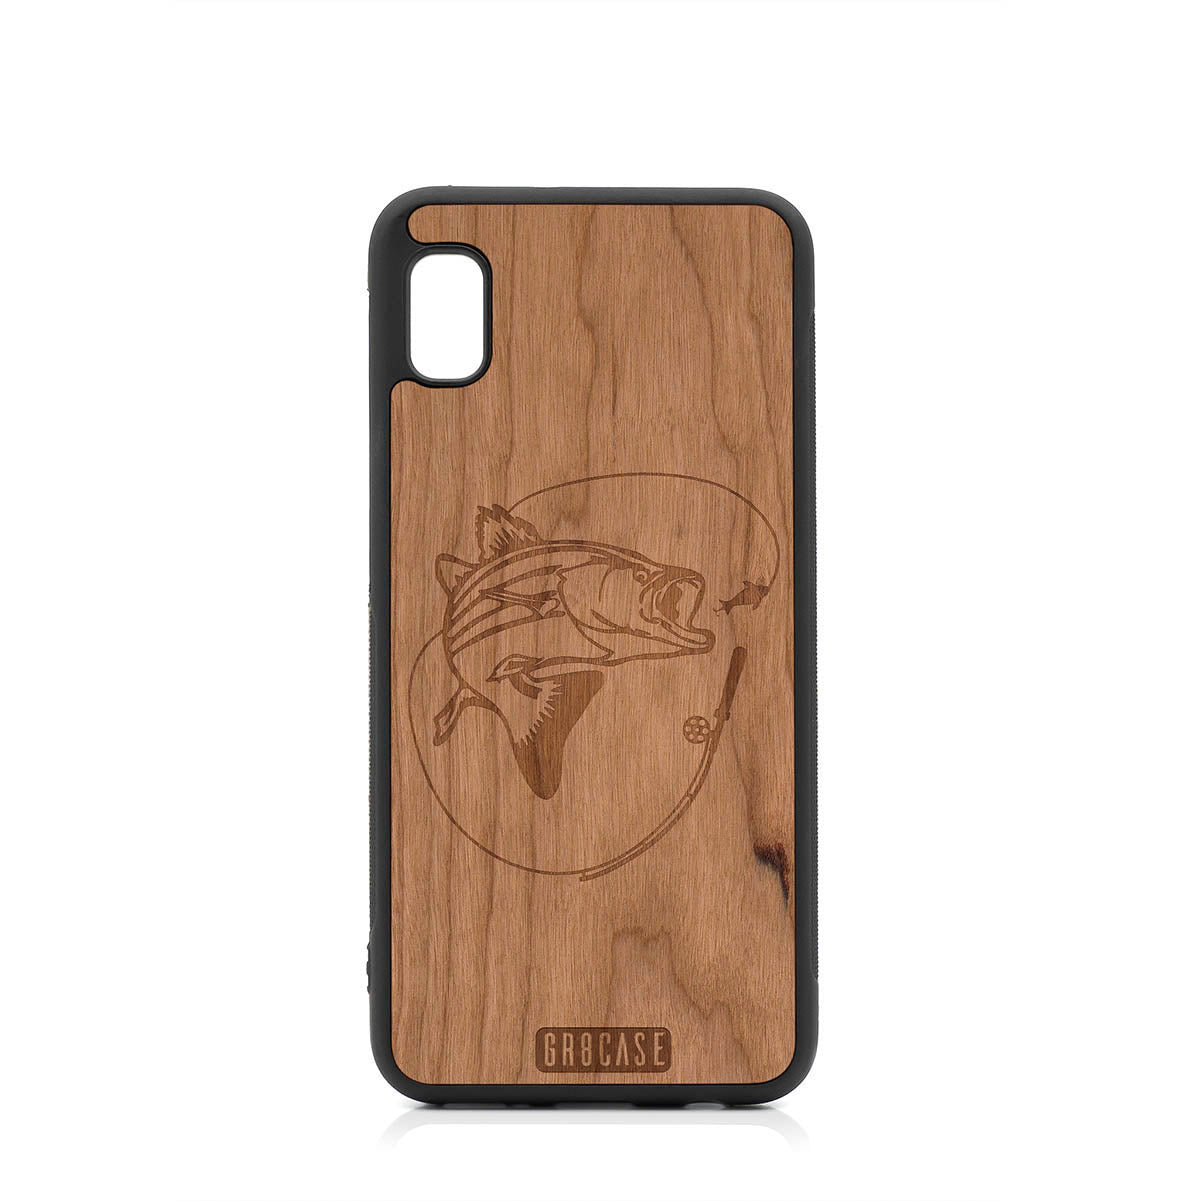 Fish and Reel Design Wood Case For Samsung Galaxy A10E by GR8CASE